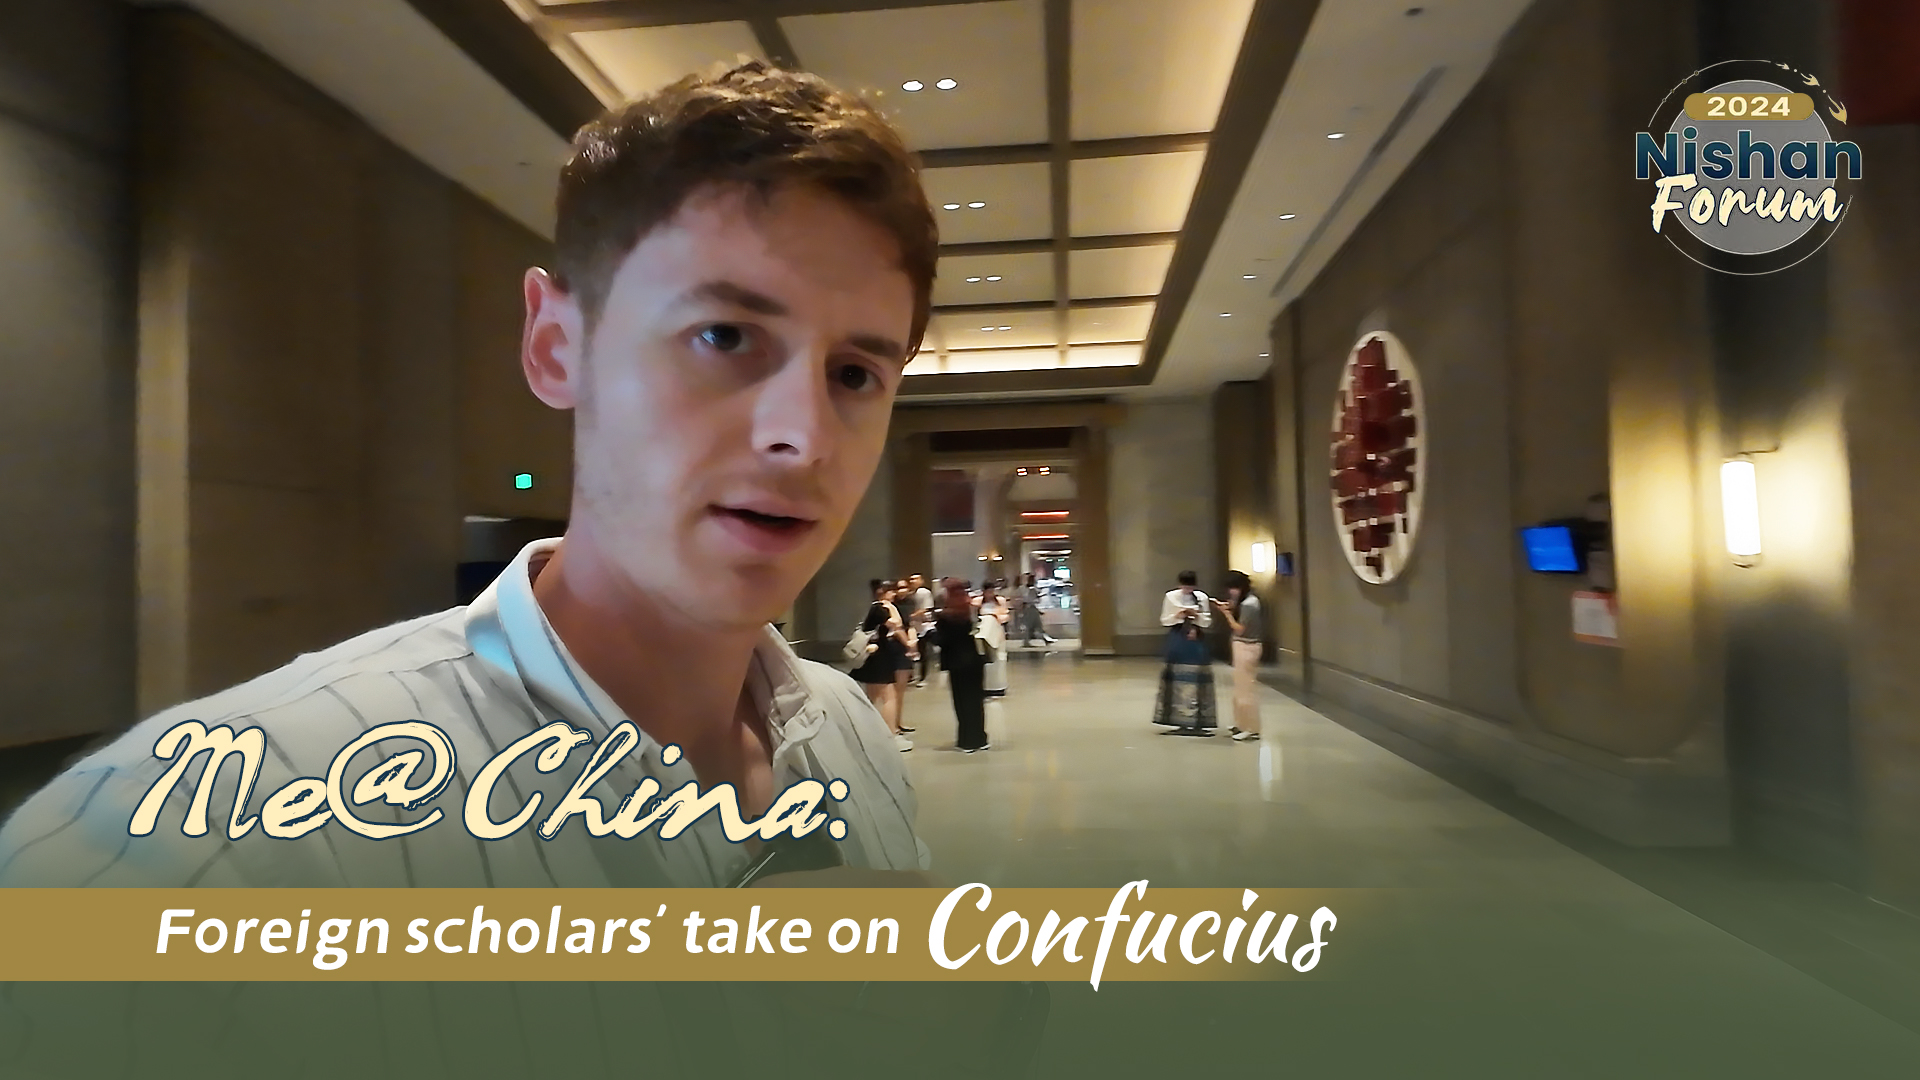 Me@China: Foreign scholars' take on Confucius